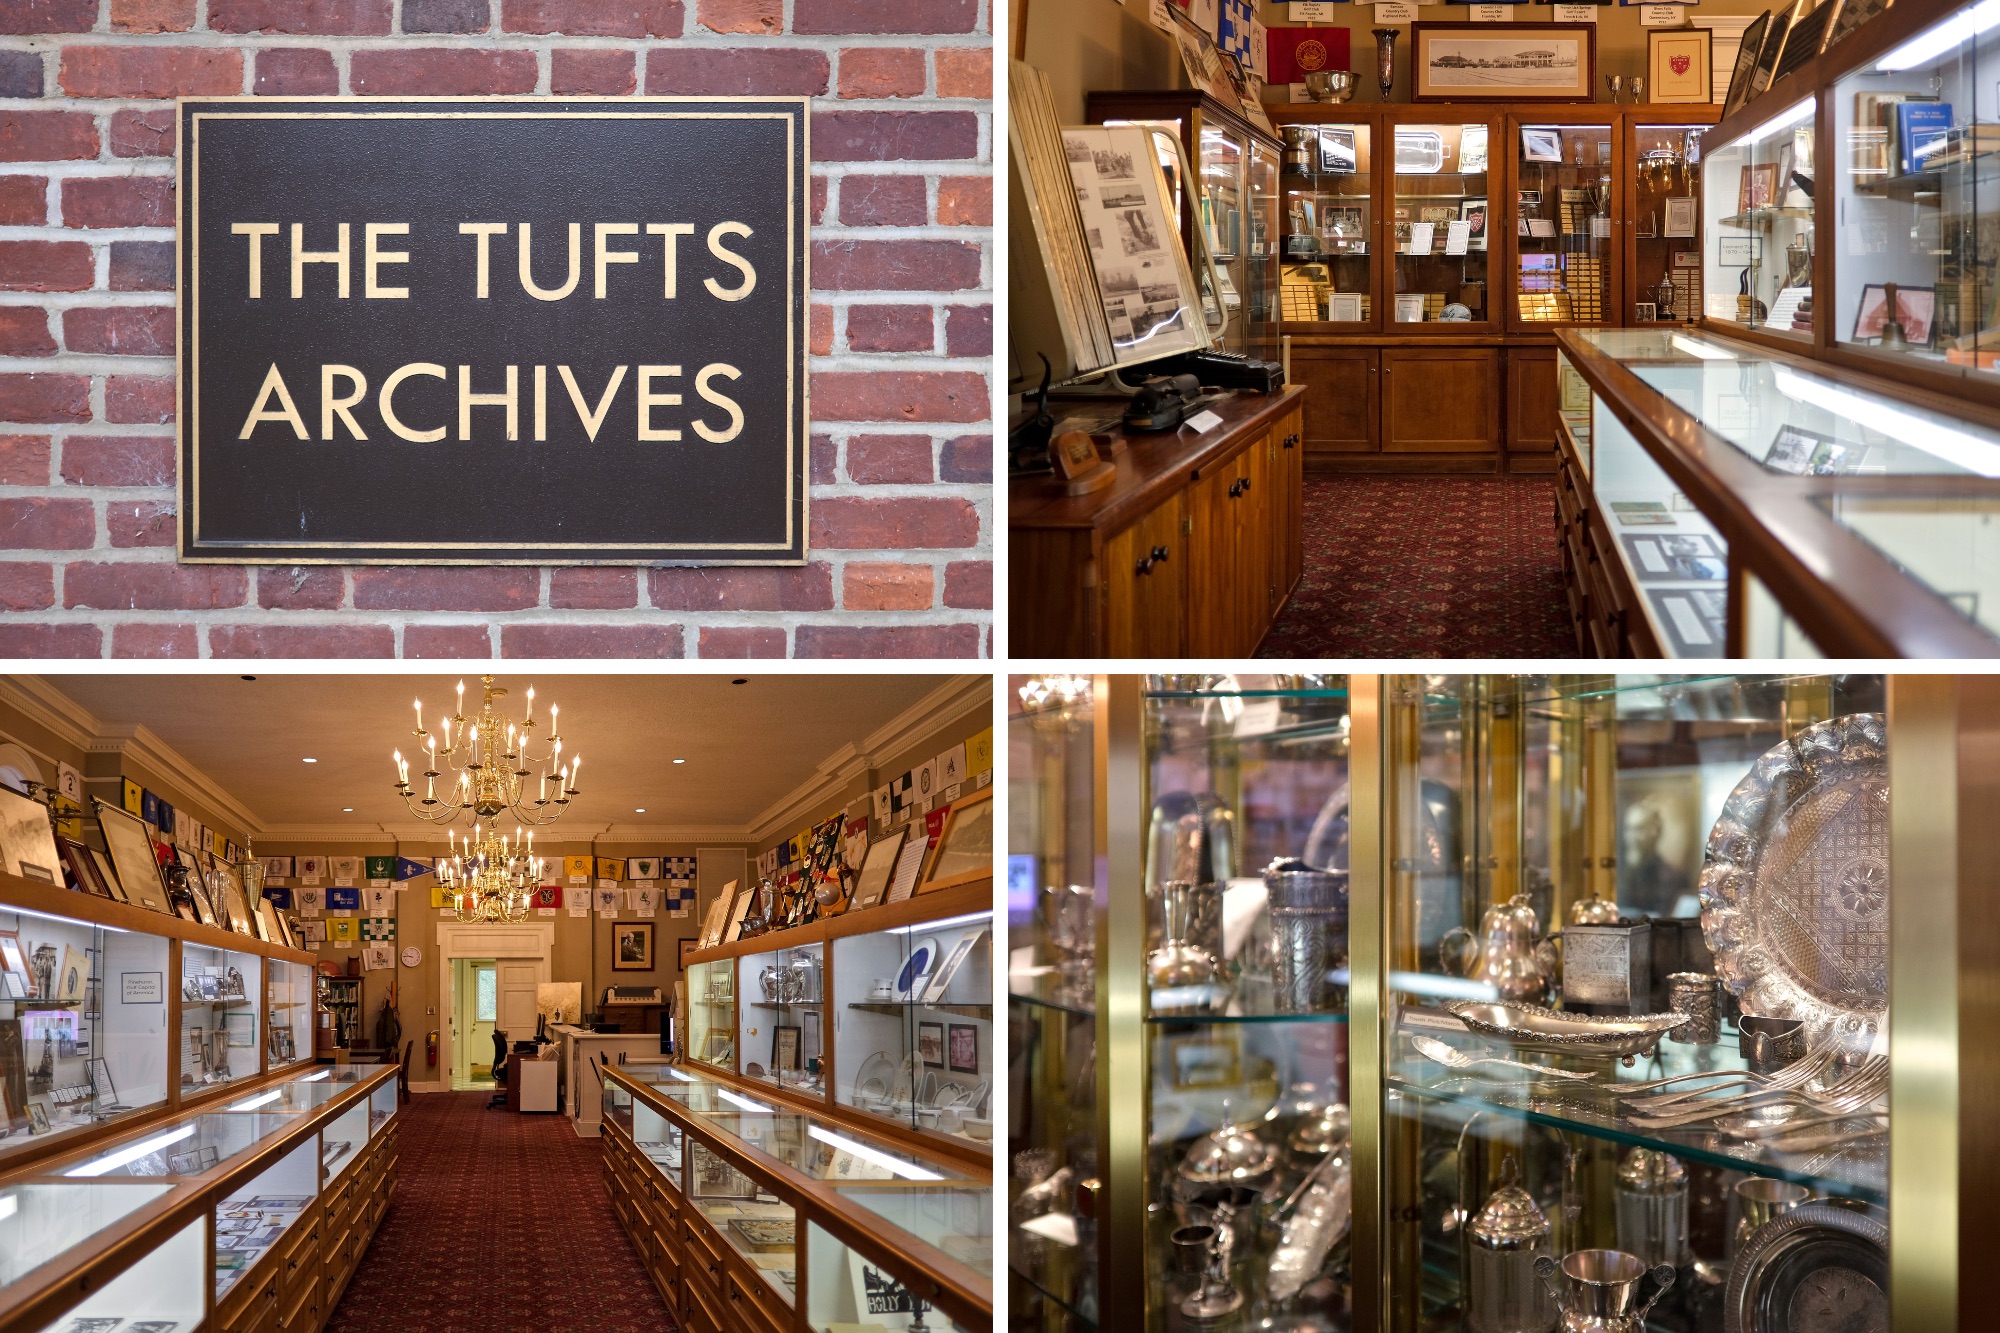 Four images taken at The Tufts Archives, including several cabinets of archives